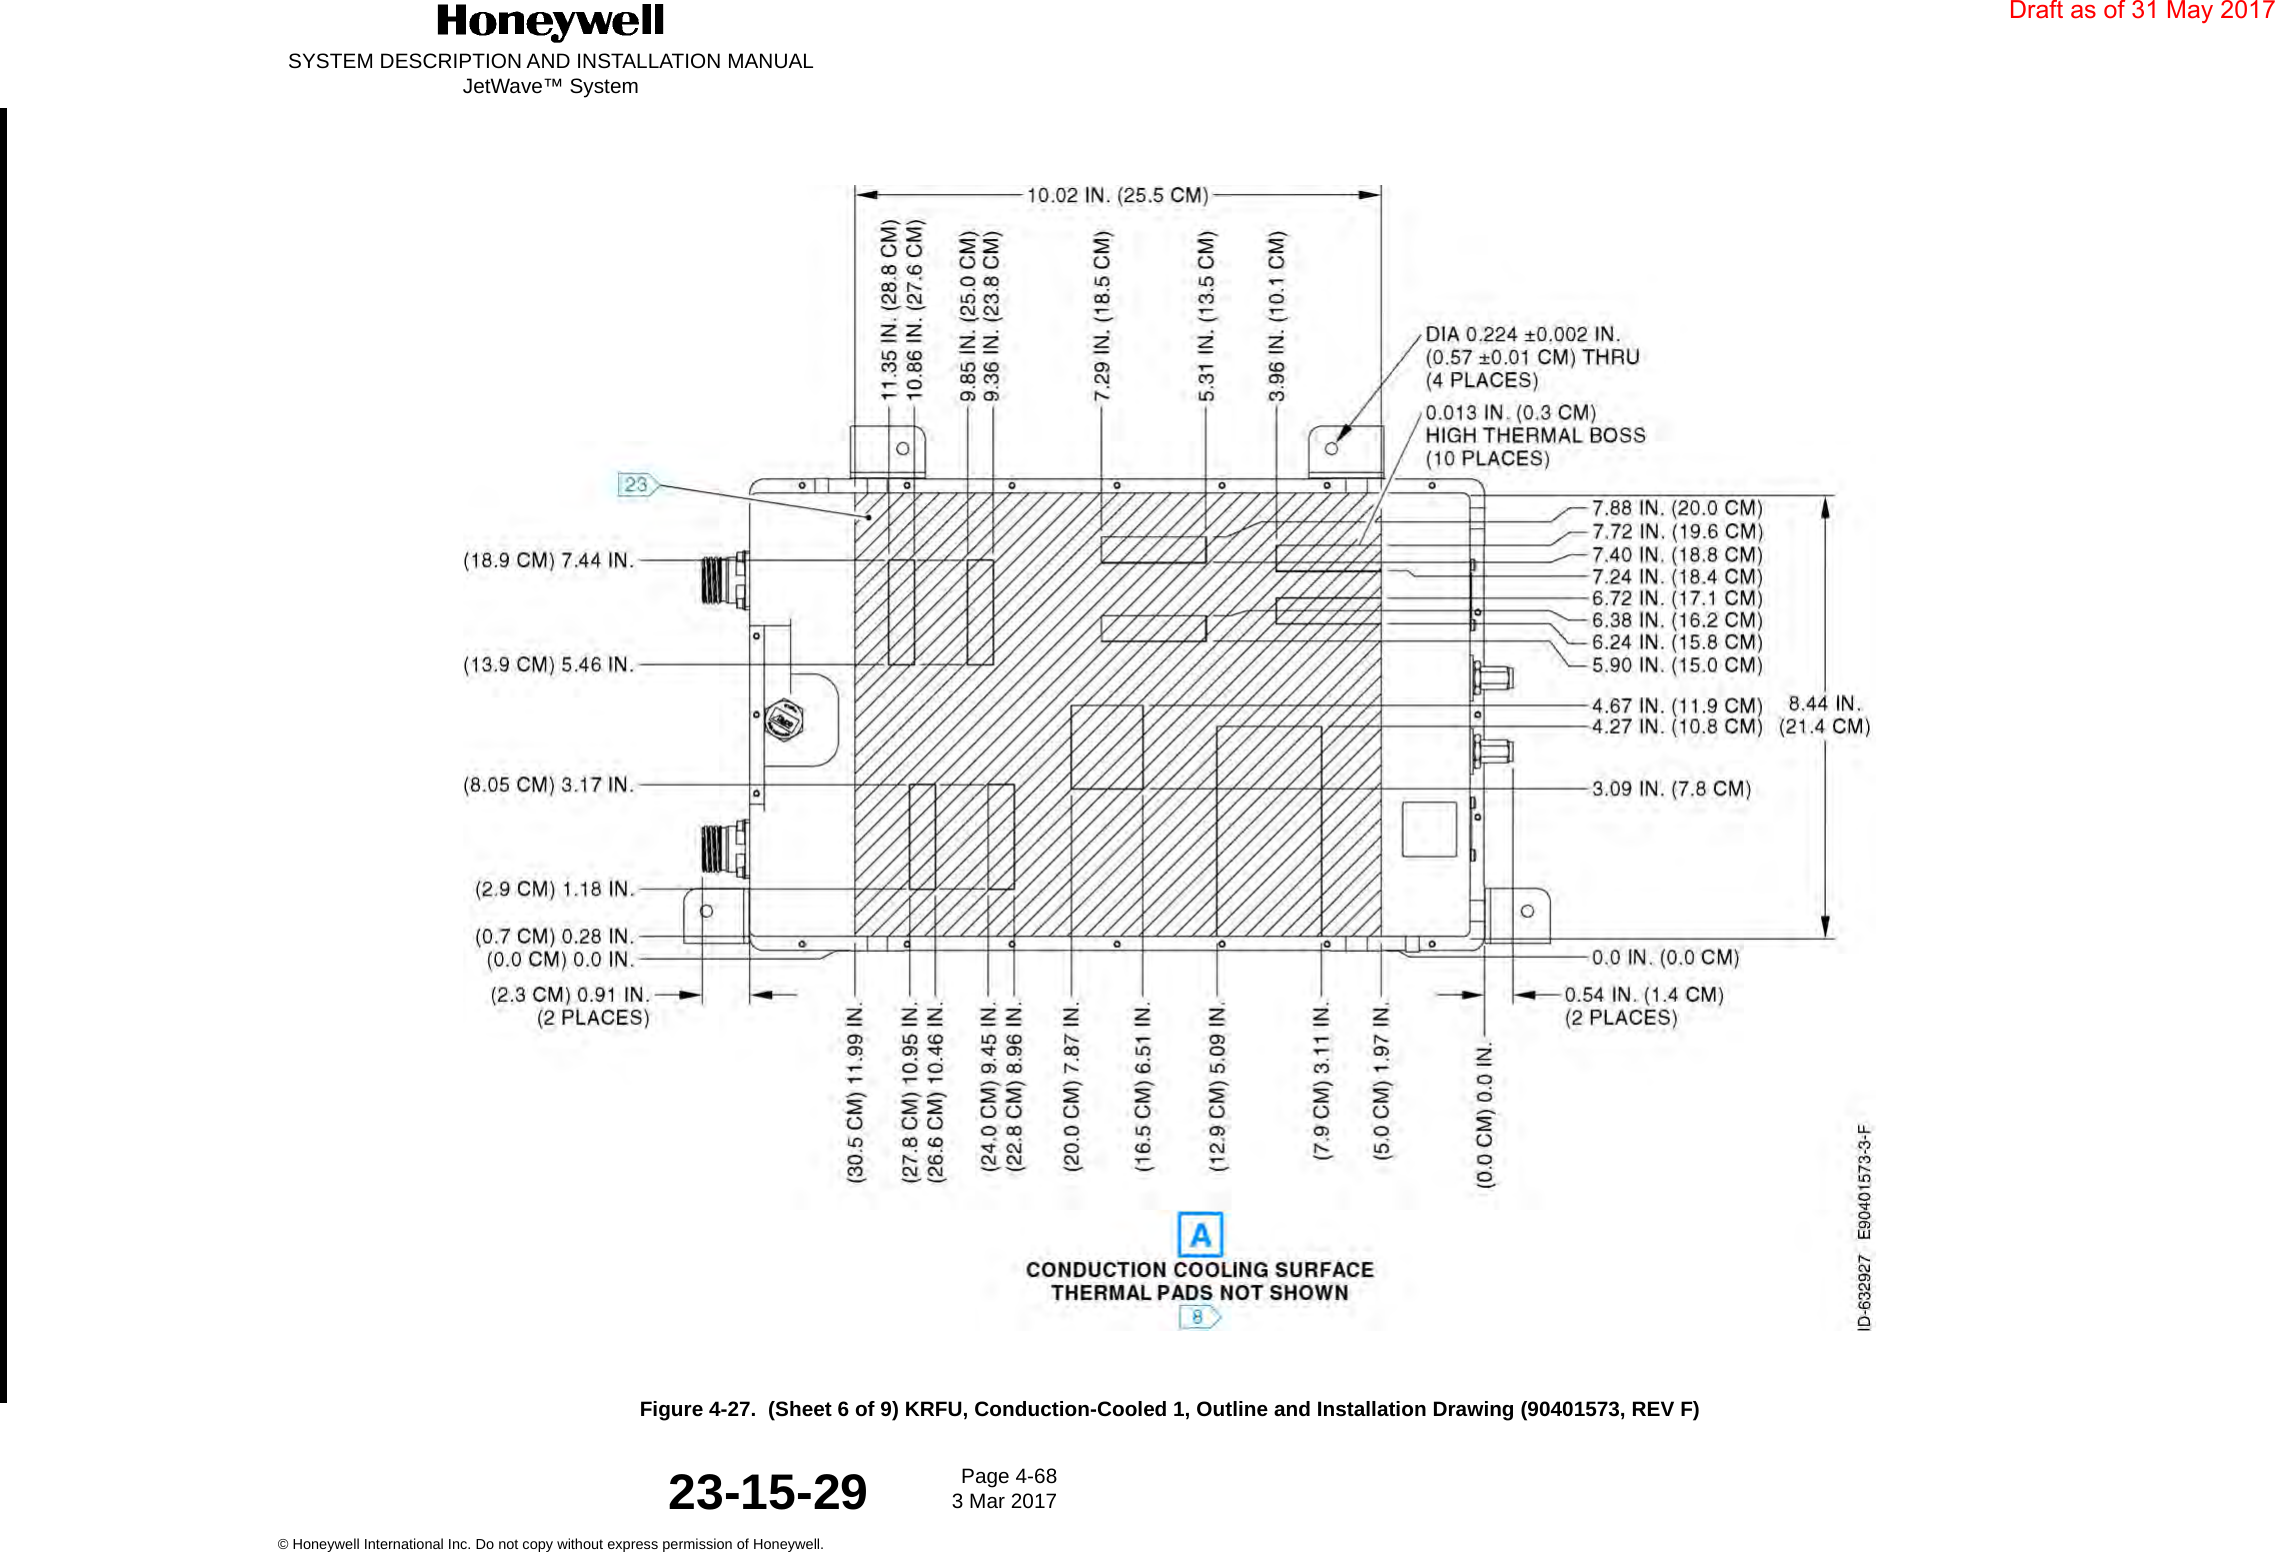 SYSTEM DESCRIPTION AND INSTALLATION MANUALJetWave™ SystemPage 4-68 3 Mar 2017© Honeywell International Inc. Do not copy without express permission of Honeywell.23-15-29Figure 4-27.  (Sheet 6 of 9) KRFU, Conduction-Cooled 1, Outline and Installation Drawing (90401573, REV F)Draft as of 31 May 2017